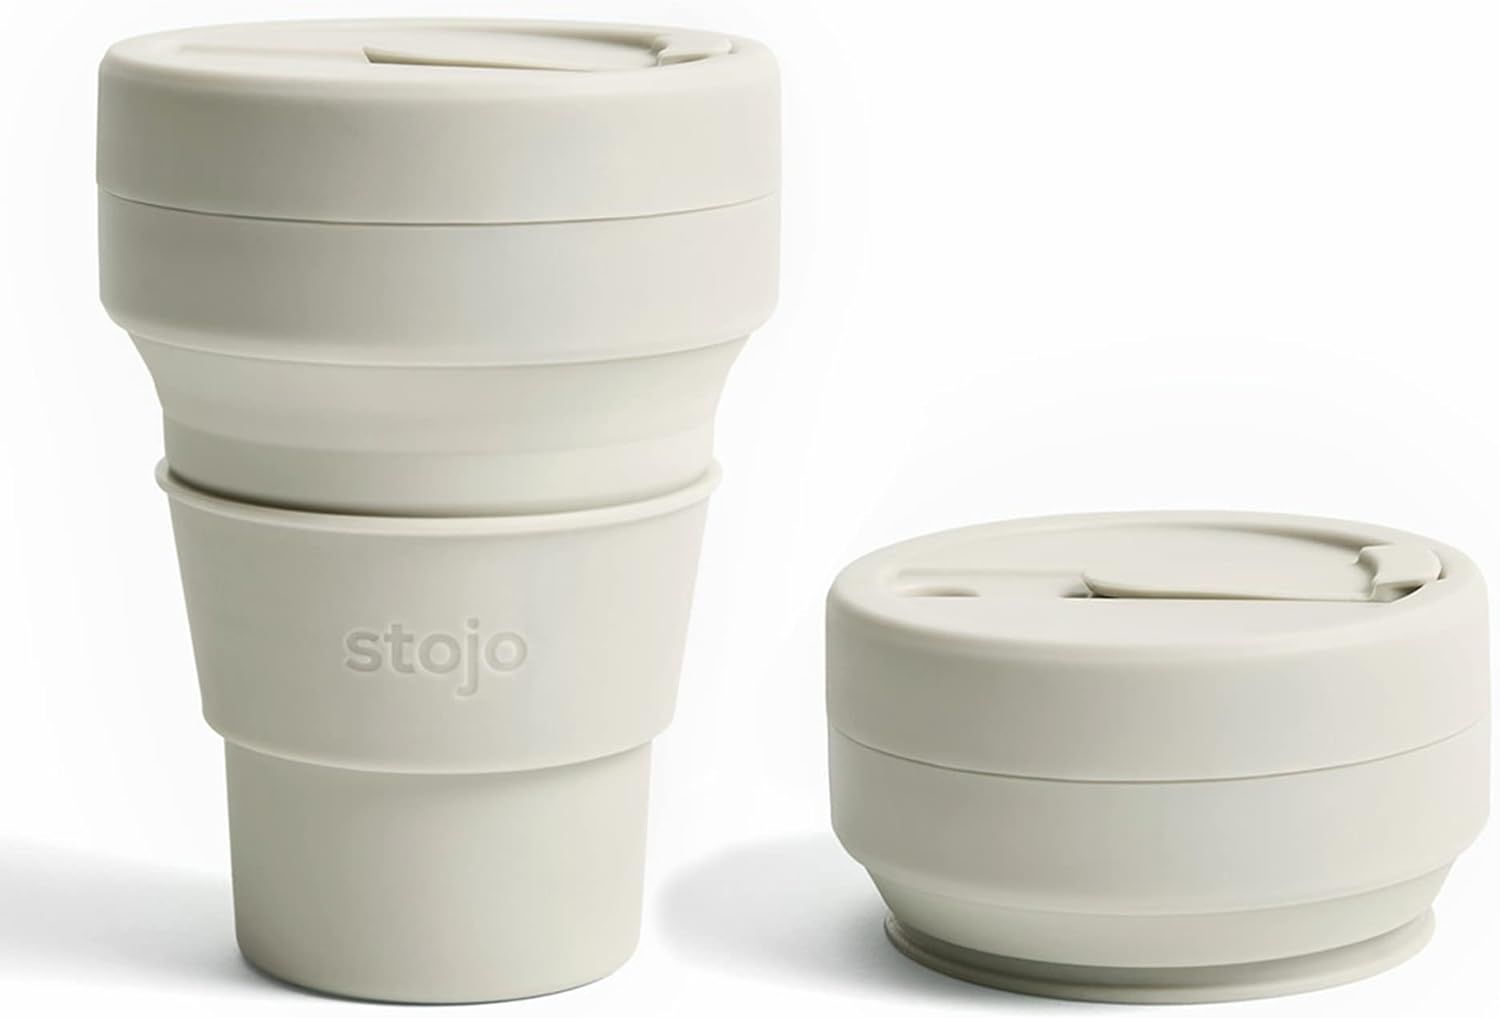 STOJO Collapsible Travel Cup - Oat, 12oz / 355ml - Reusable To-Go Pocket Size Silicone Cup for Ho... | Amazon (US)